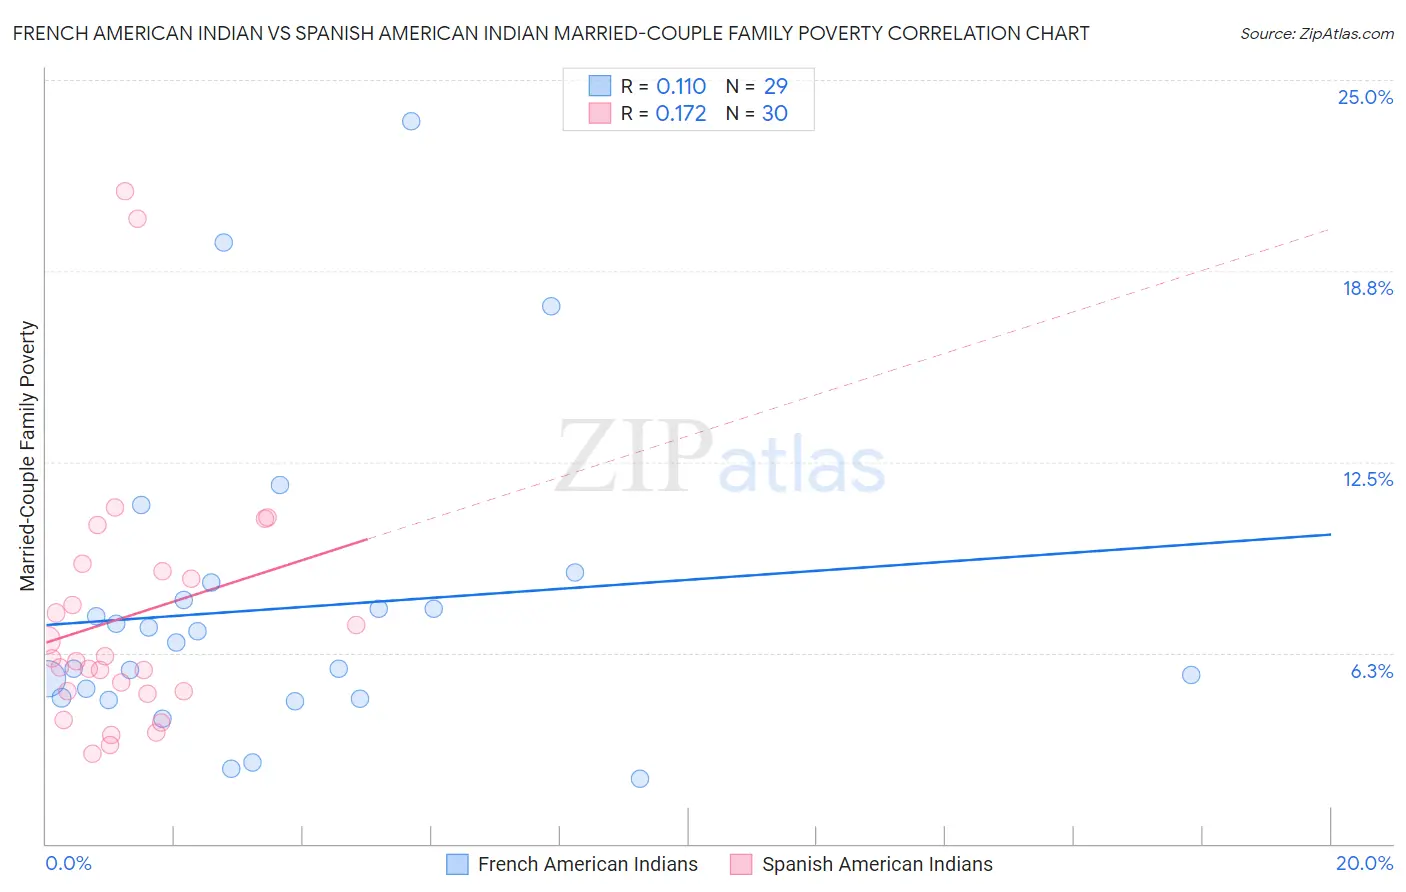 French American Indian vs Spanish American Indian Married-Couple Family Poverty